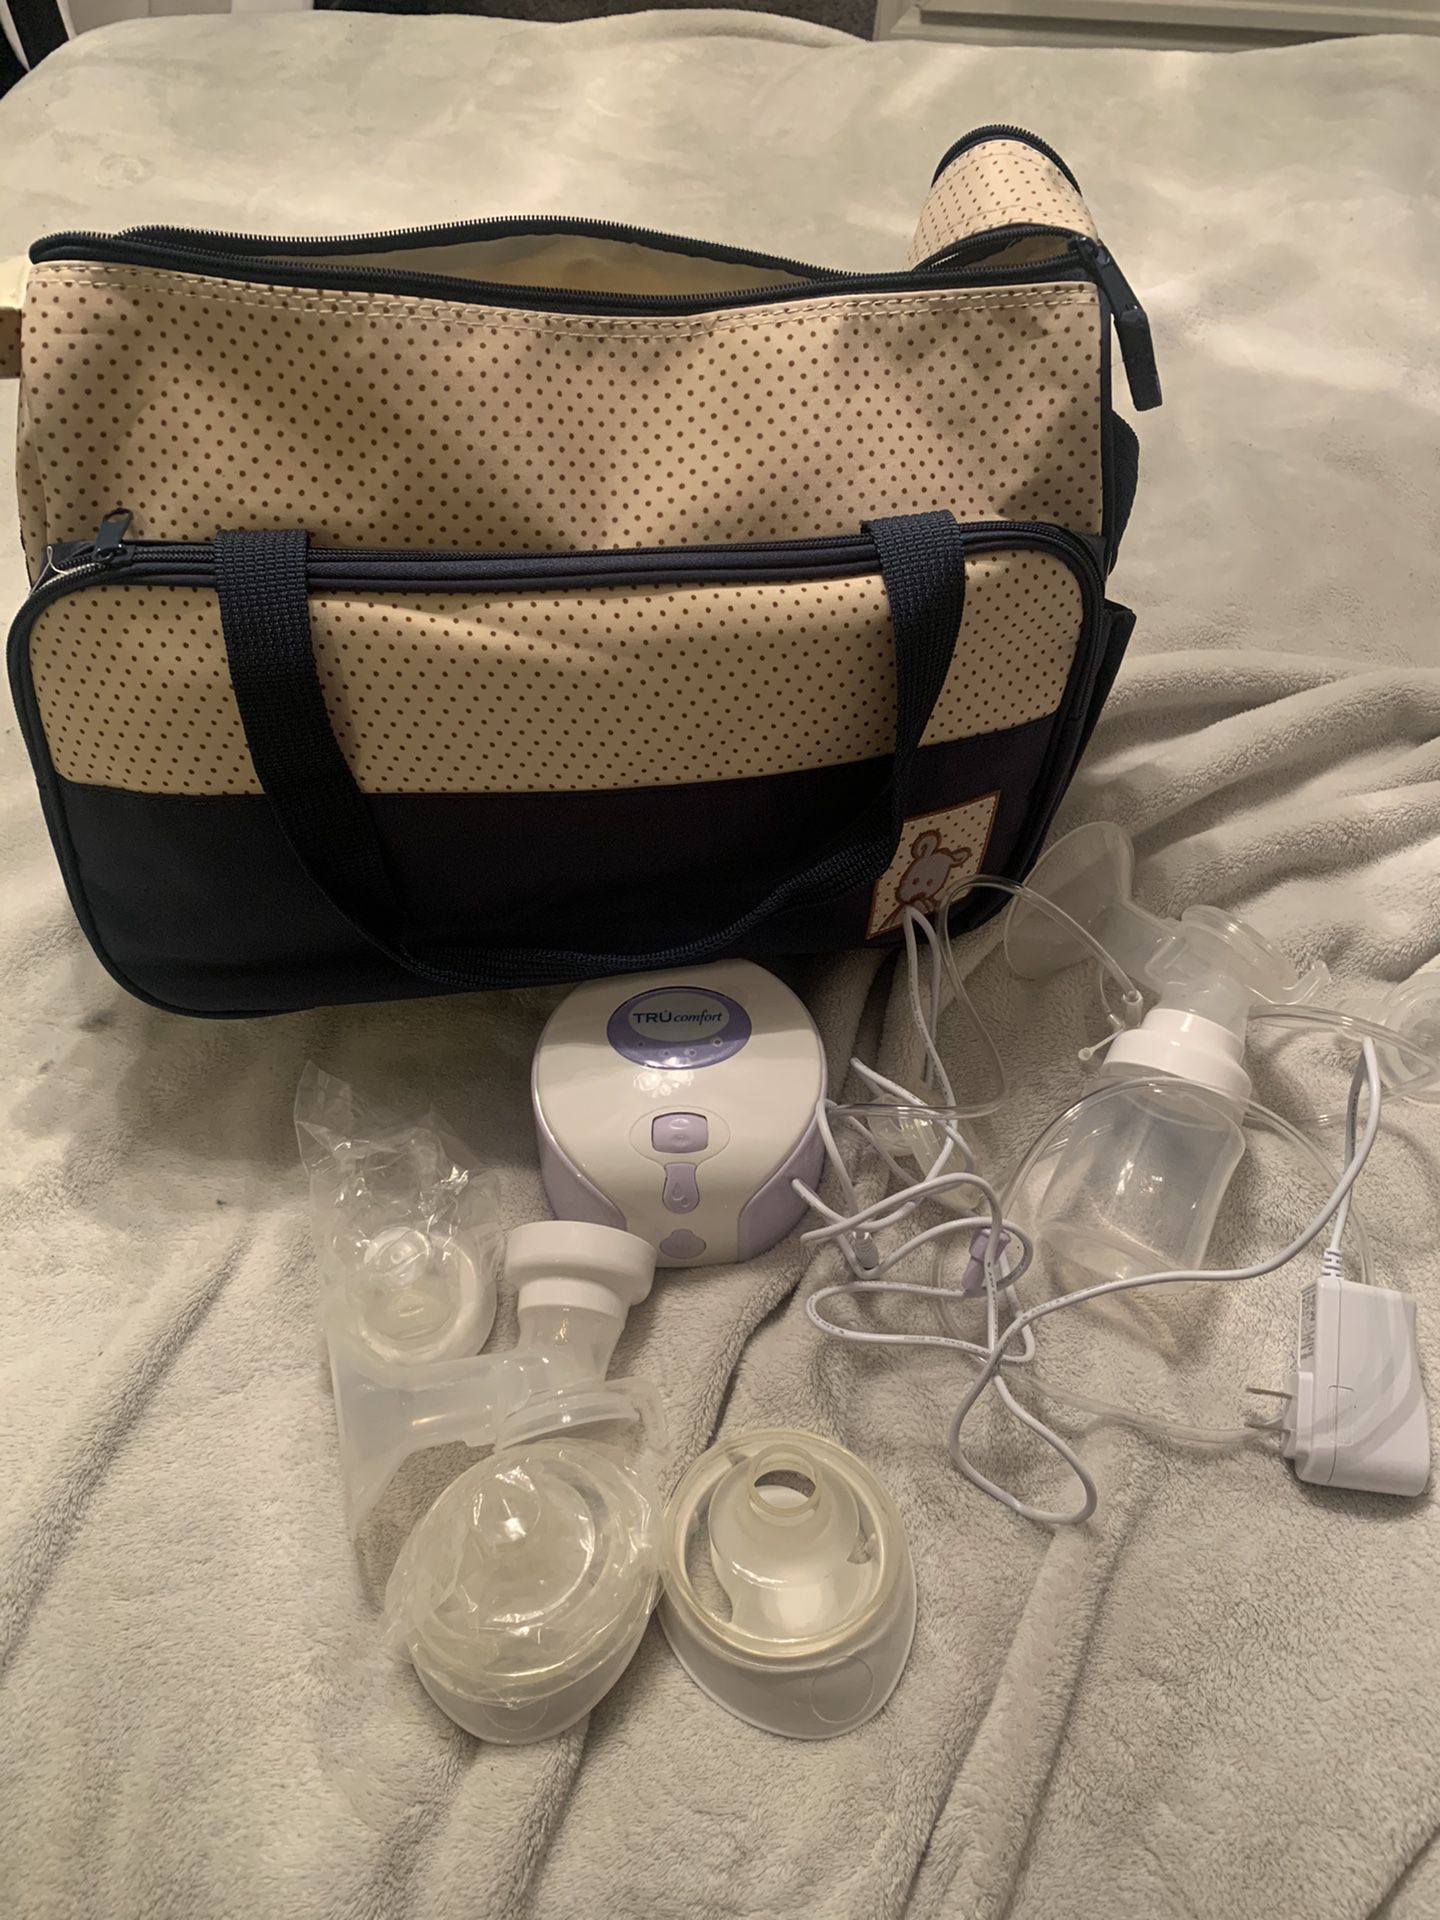 TRUcomfort double electric breast pump & carrying case